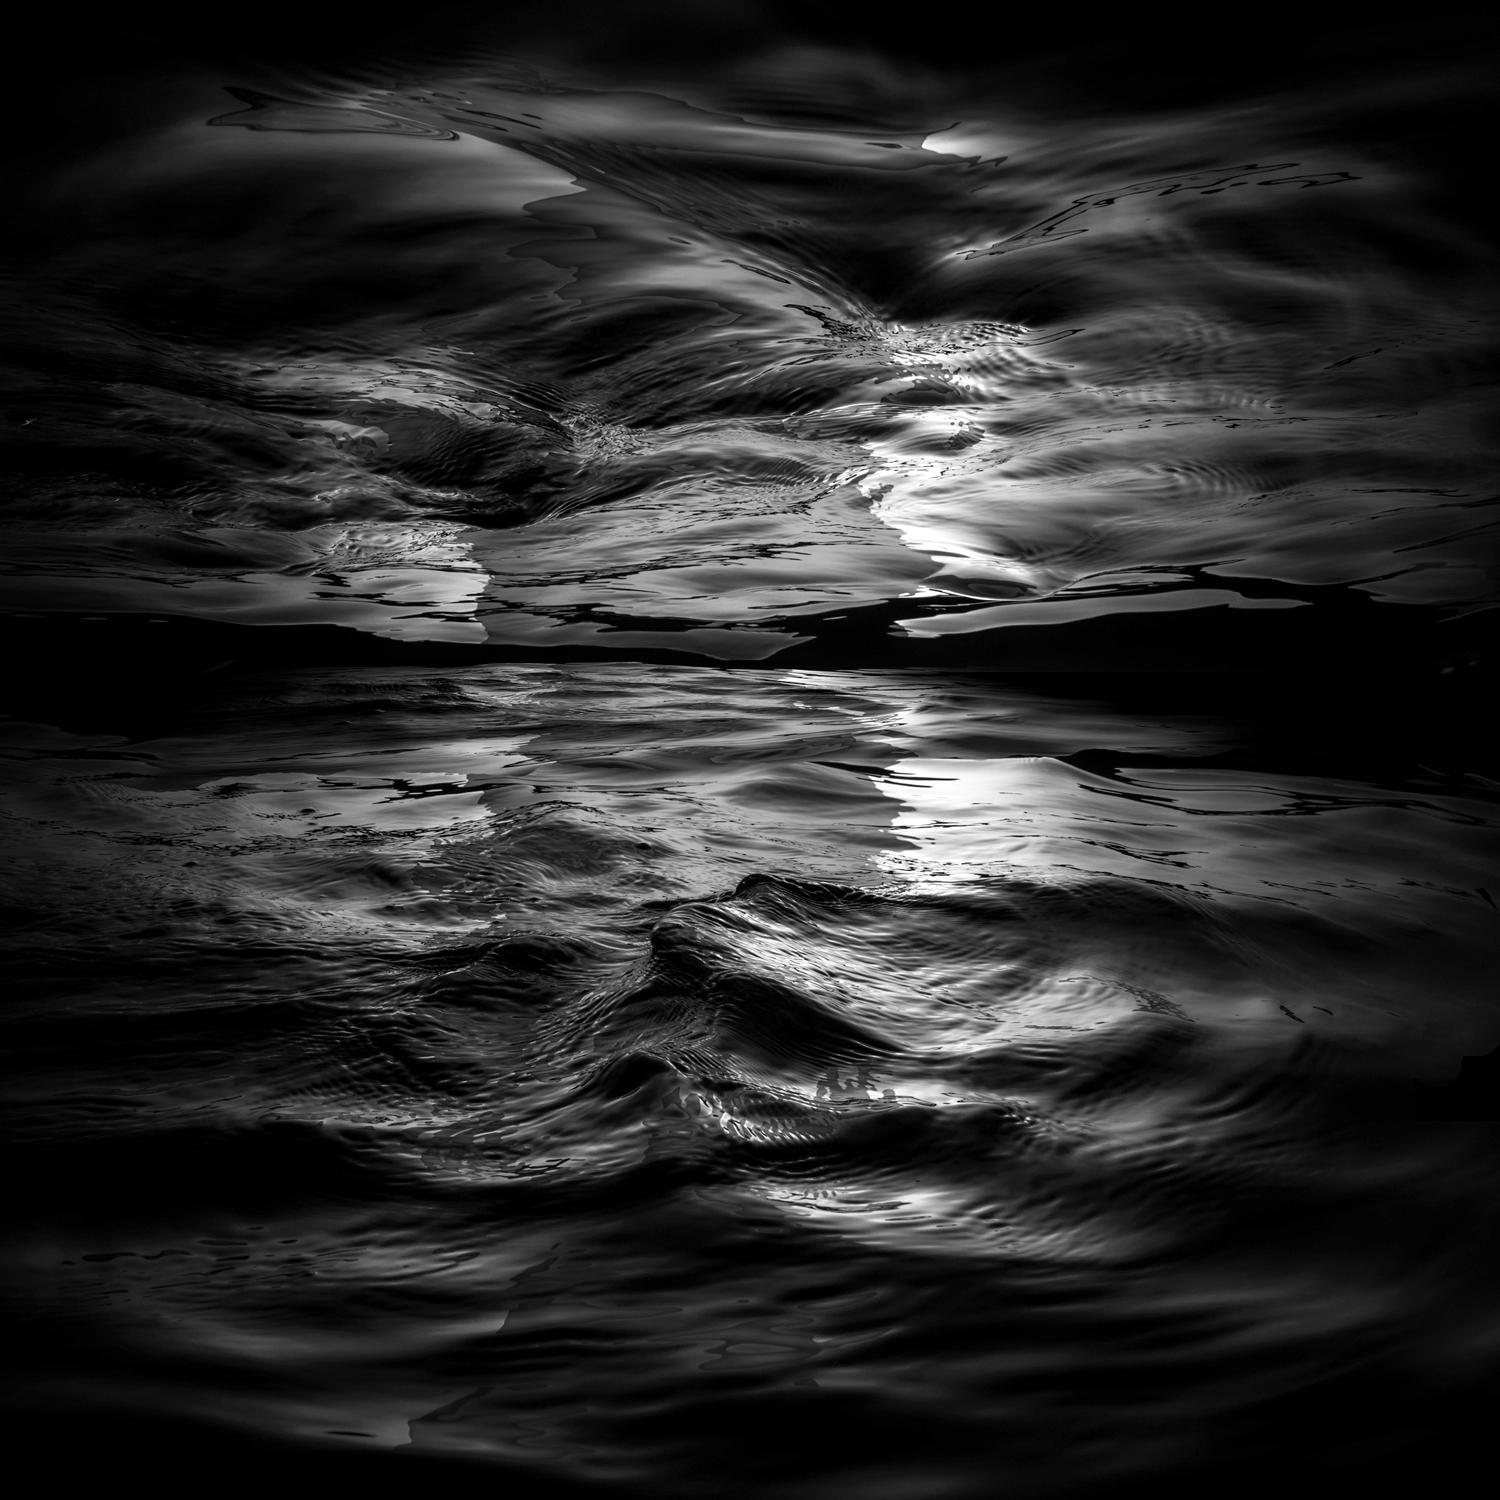 Wave II - large scale abstract photograph of water surface reflections